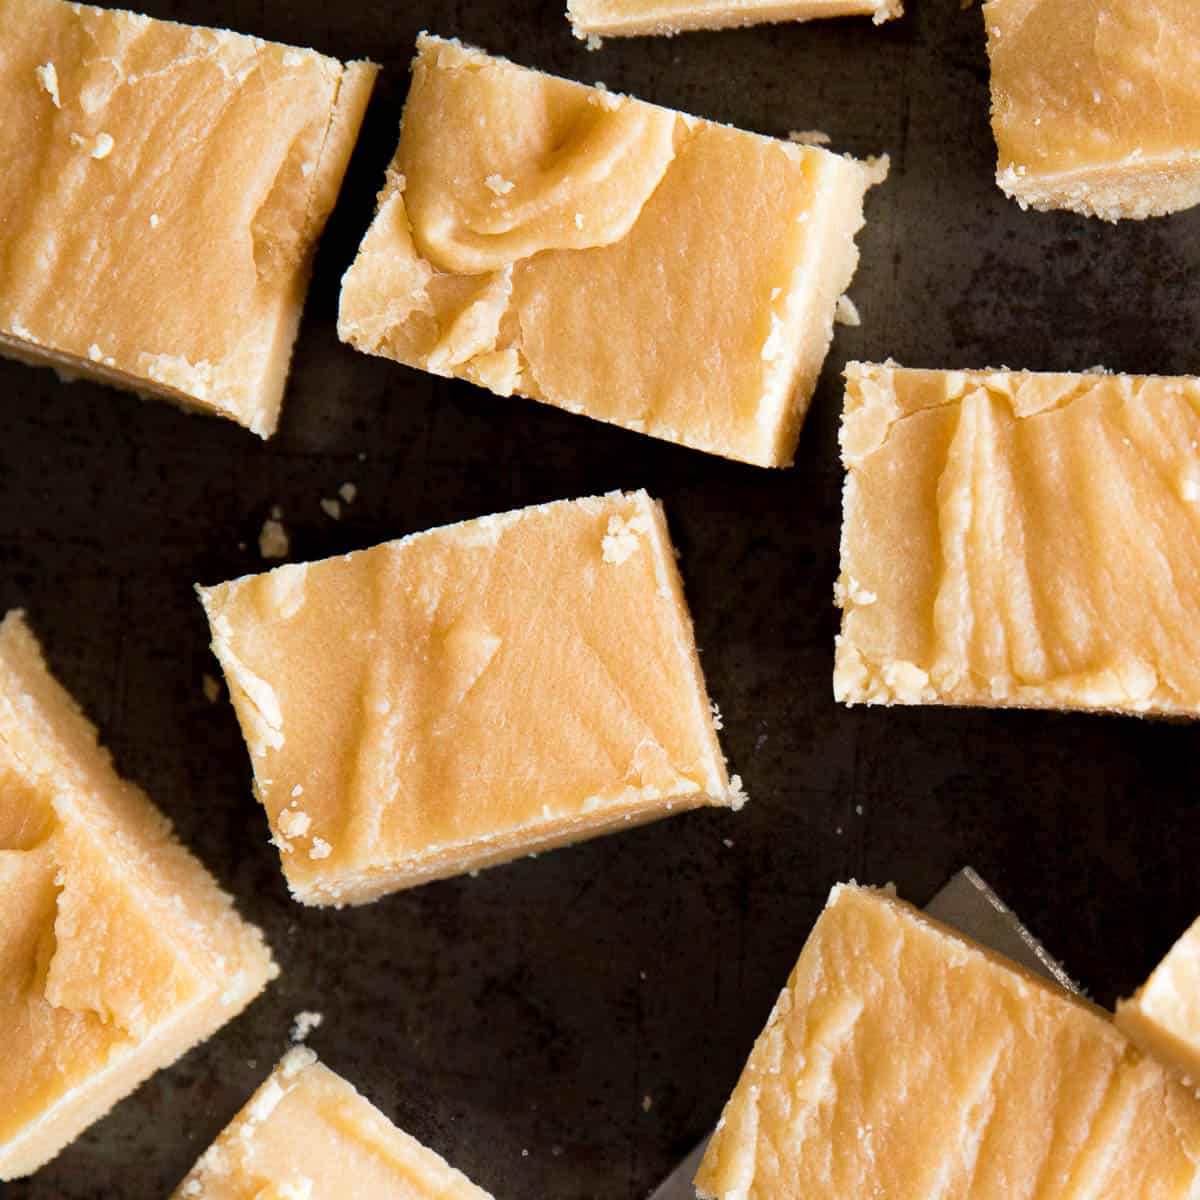 Golden slices of Scottish tablet on a baking tray.